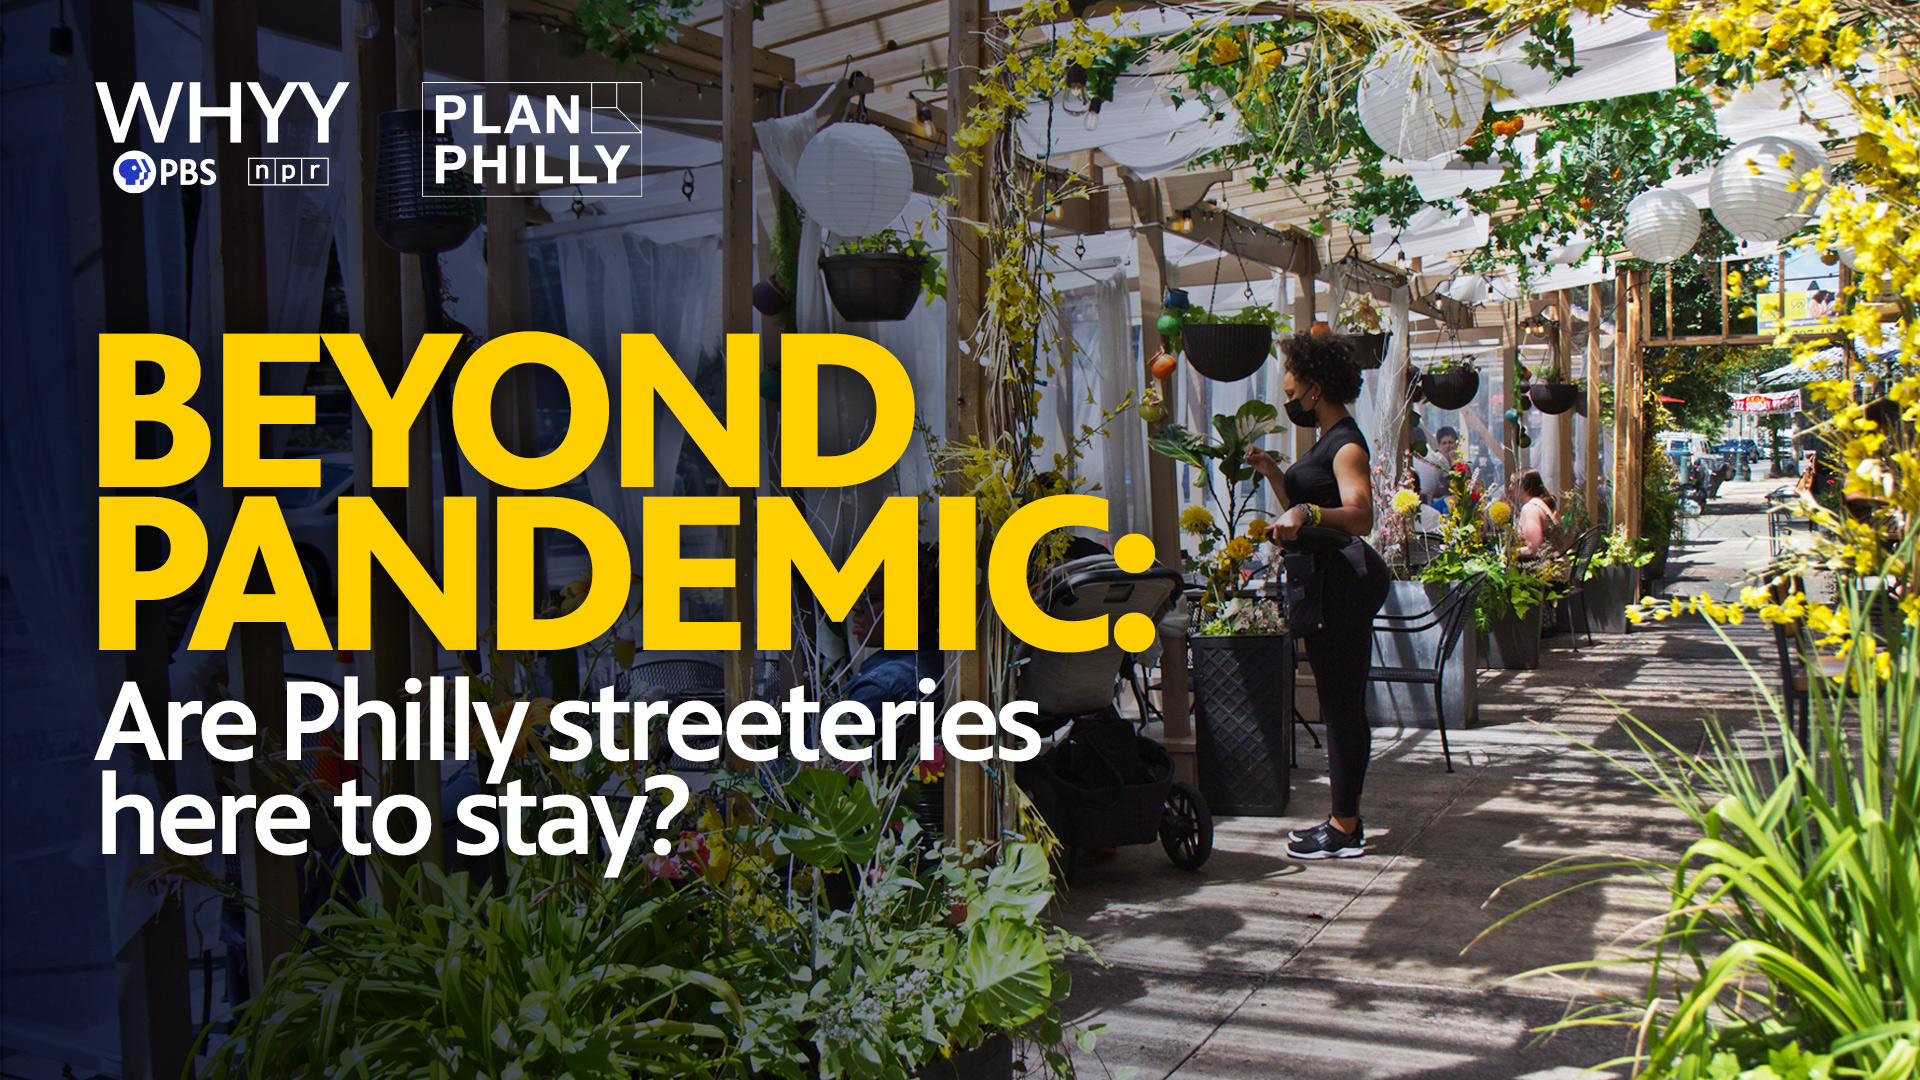 Image of Booker's streetery in West Philly that reads: Beyond Pandemic: Are Philly streeteries here to stay?